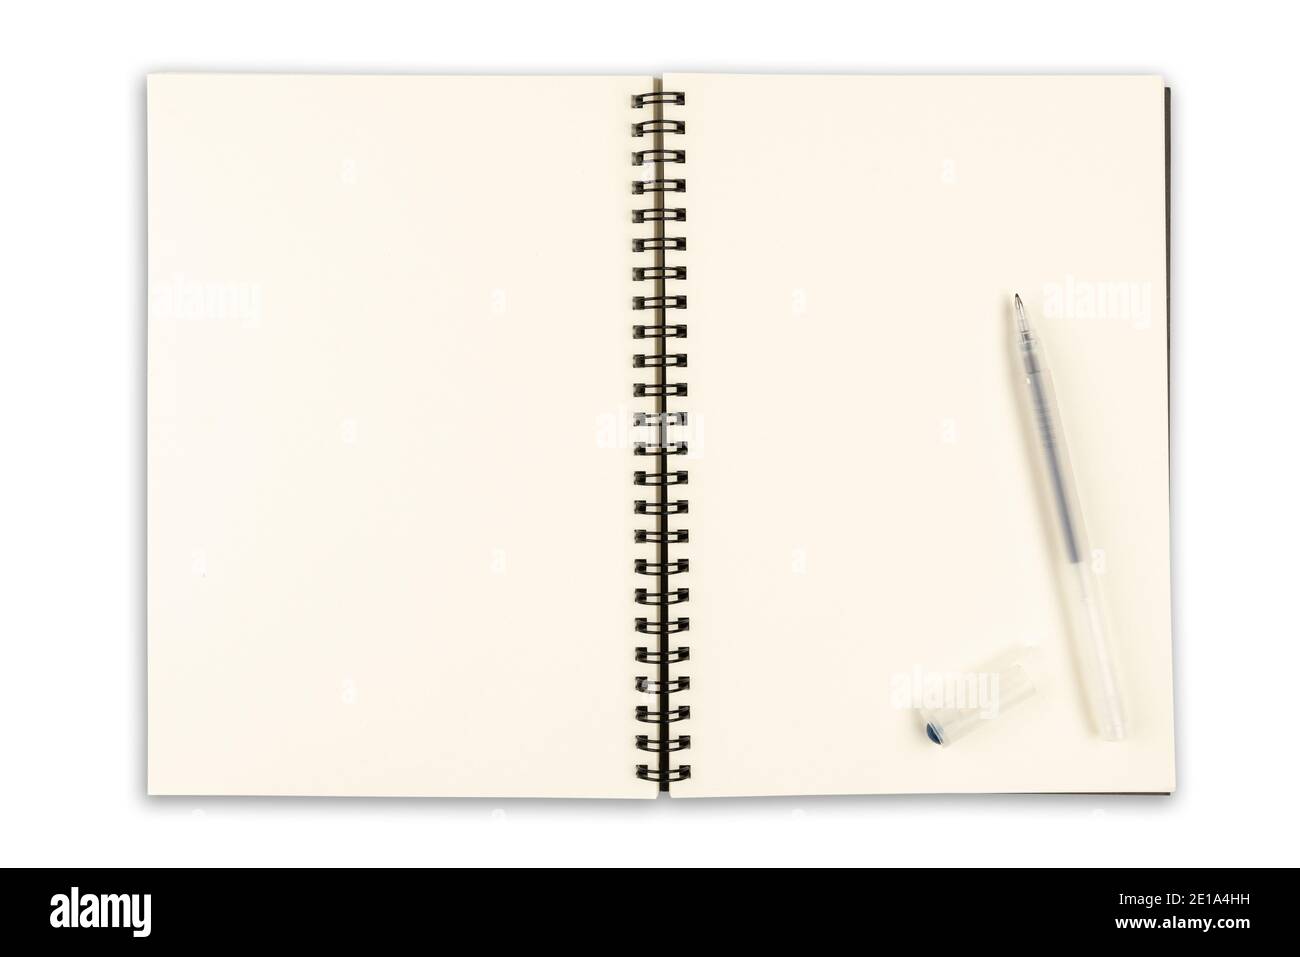 open spiral notebook with blank pages and pen isolated on white background Stock Photo